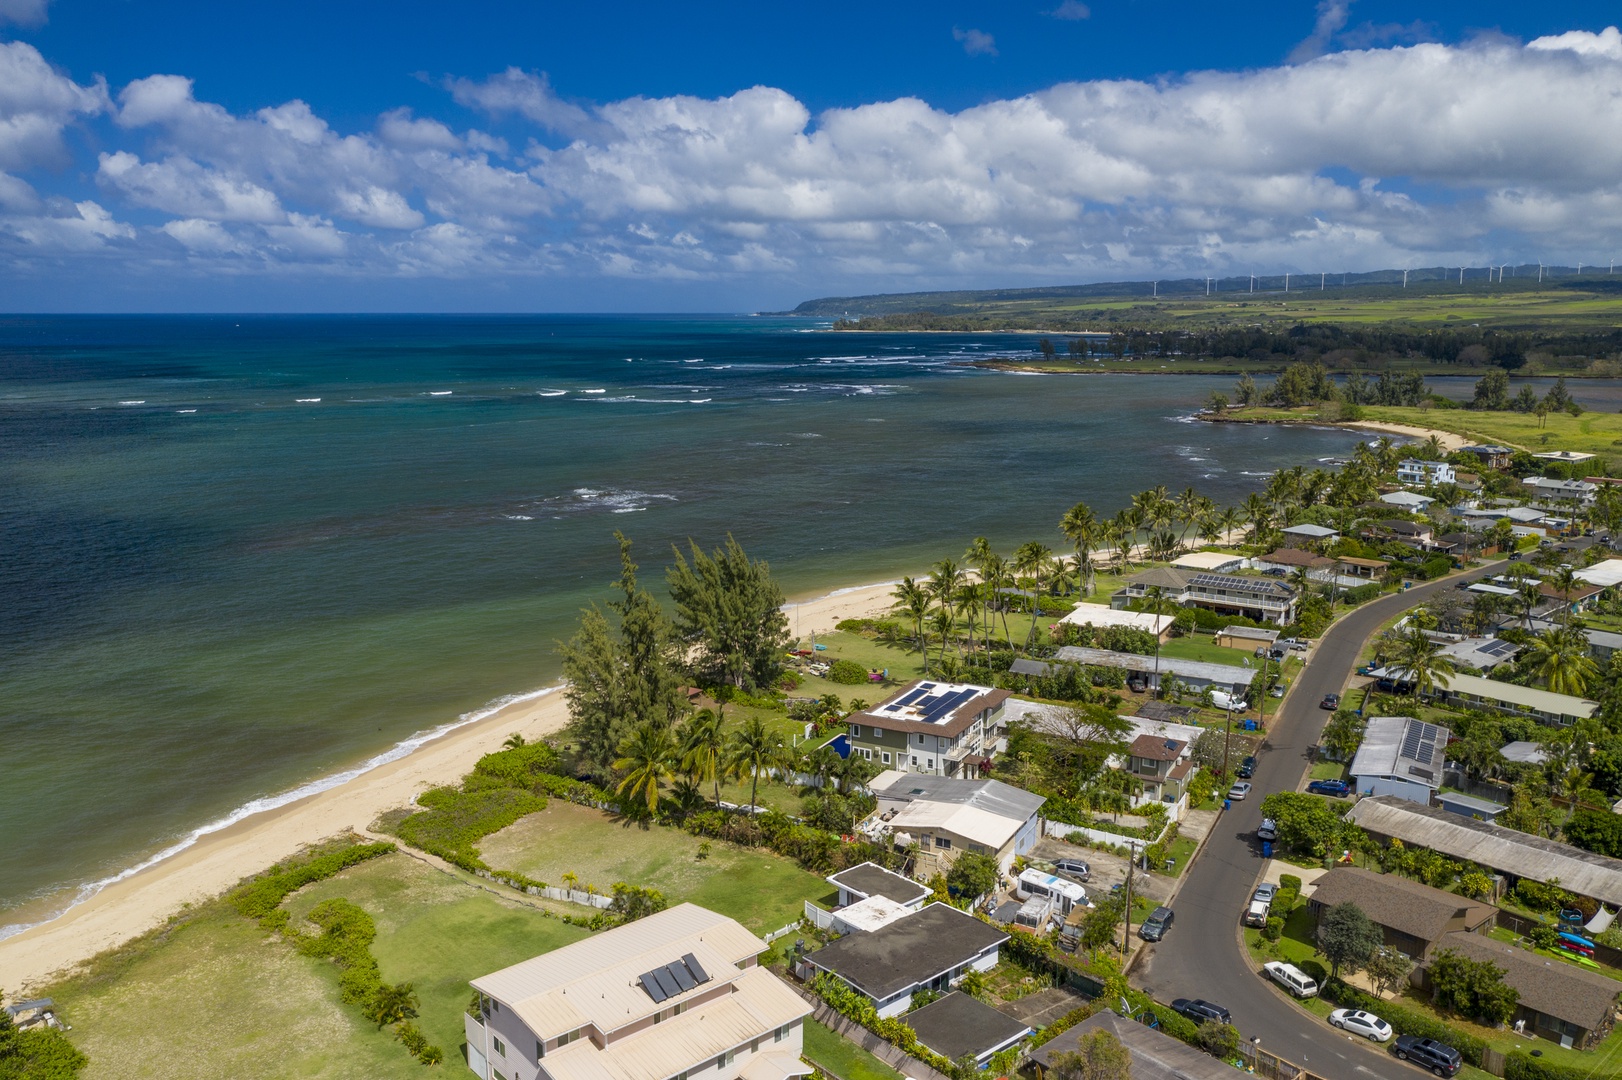 Waialua Vacation Rentals, Kala'iku Estate - Also convenient to grocery stores and farmers' markets, Kala`iku is only a 10-minute drive from the Beach House restaurant and Haleiwa Joe's bar